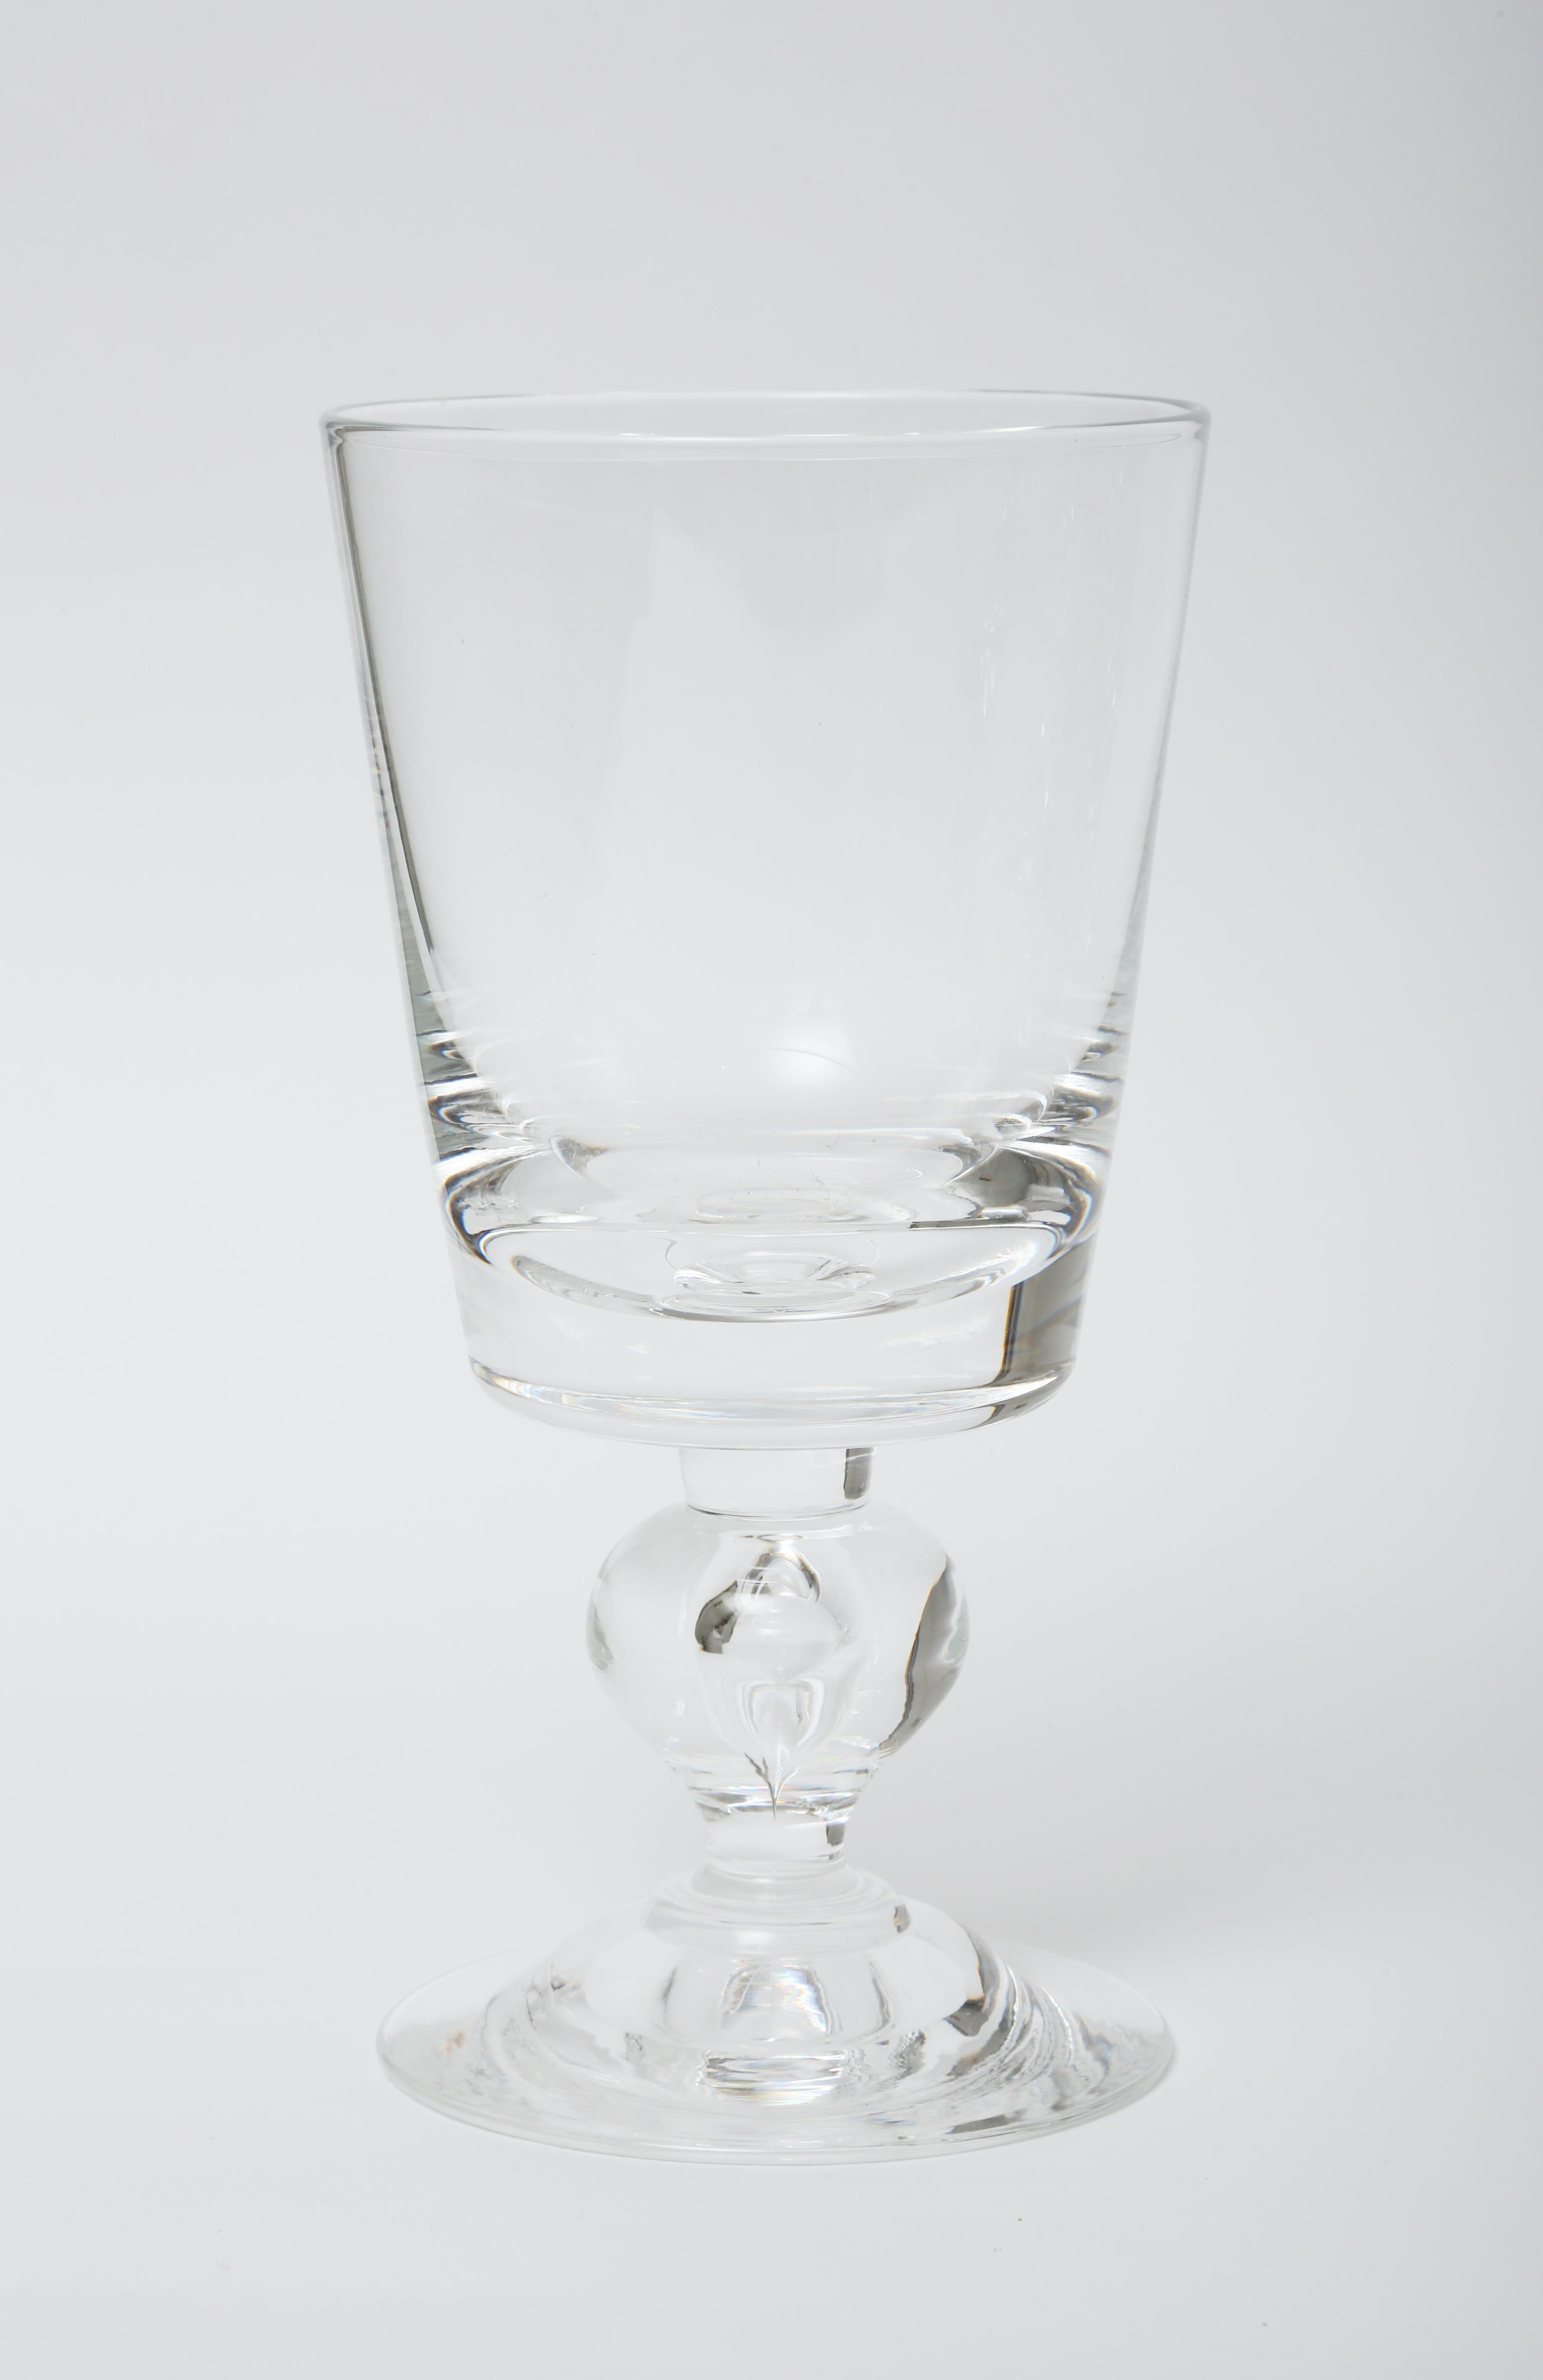 From one of America's leading Corning New York Glass manufacturers is this wonderful set of 12 very heavy weight goblets. Almost 2 pounds each glass, with a tapered design for stability and crystal clear quality for viewing. Now that we no longer